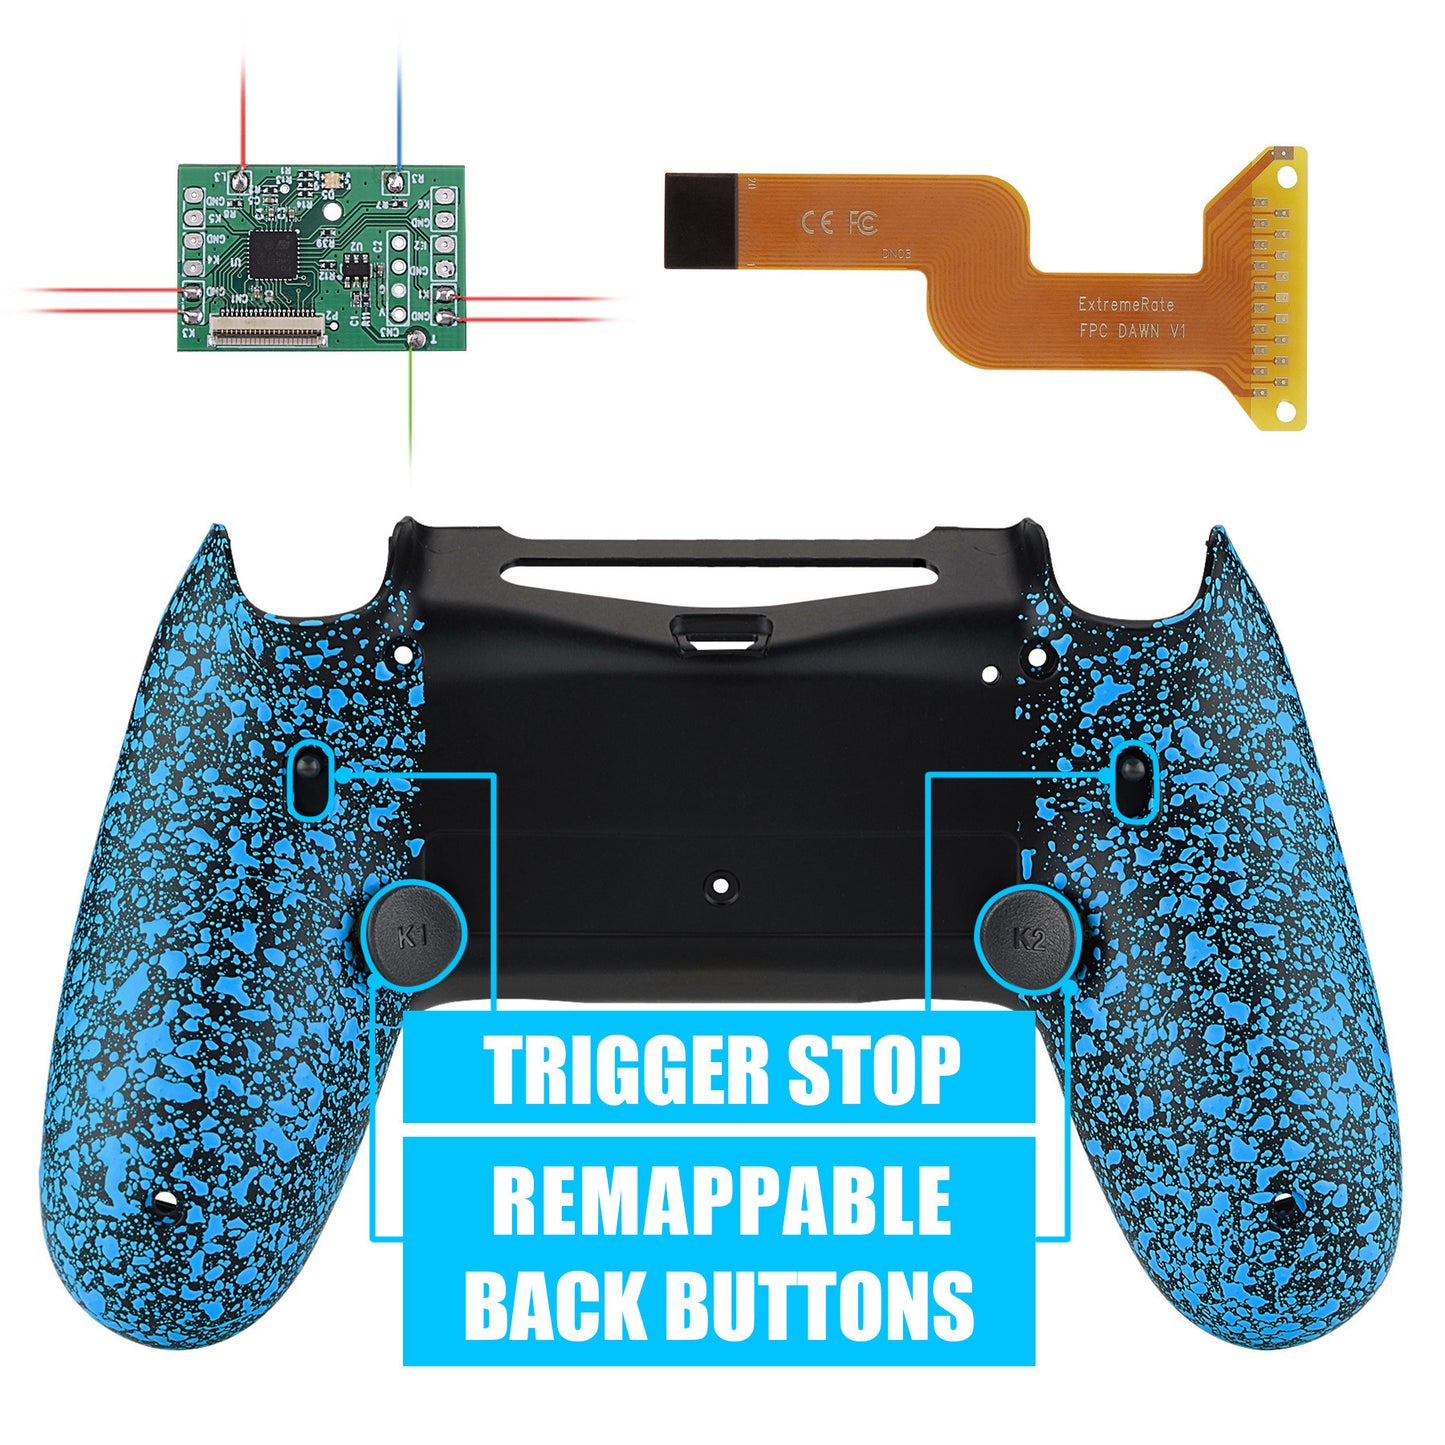 Textured Blue Dawn 2.0 FlashShot Trigger Stop Remap Kit for ps4 CUH-ZCT2 Controller, Part & Back Shell & 2 Back Buttons & 2 Trigger Lock for ps4 Controller JDM 040/050/055 - P4QS004 eXtremeRate